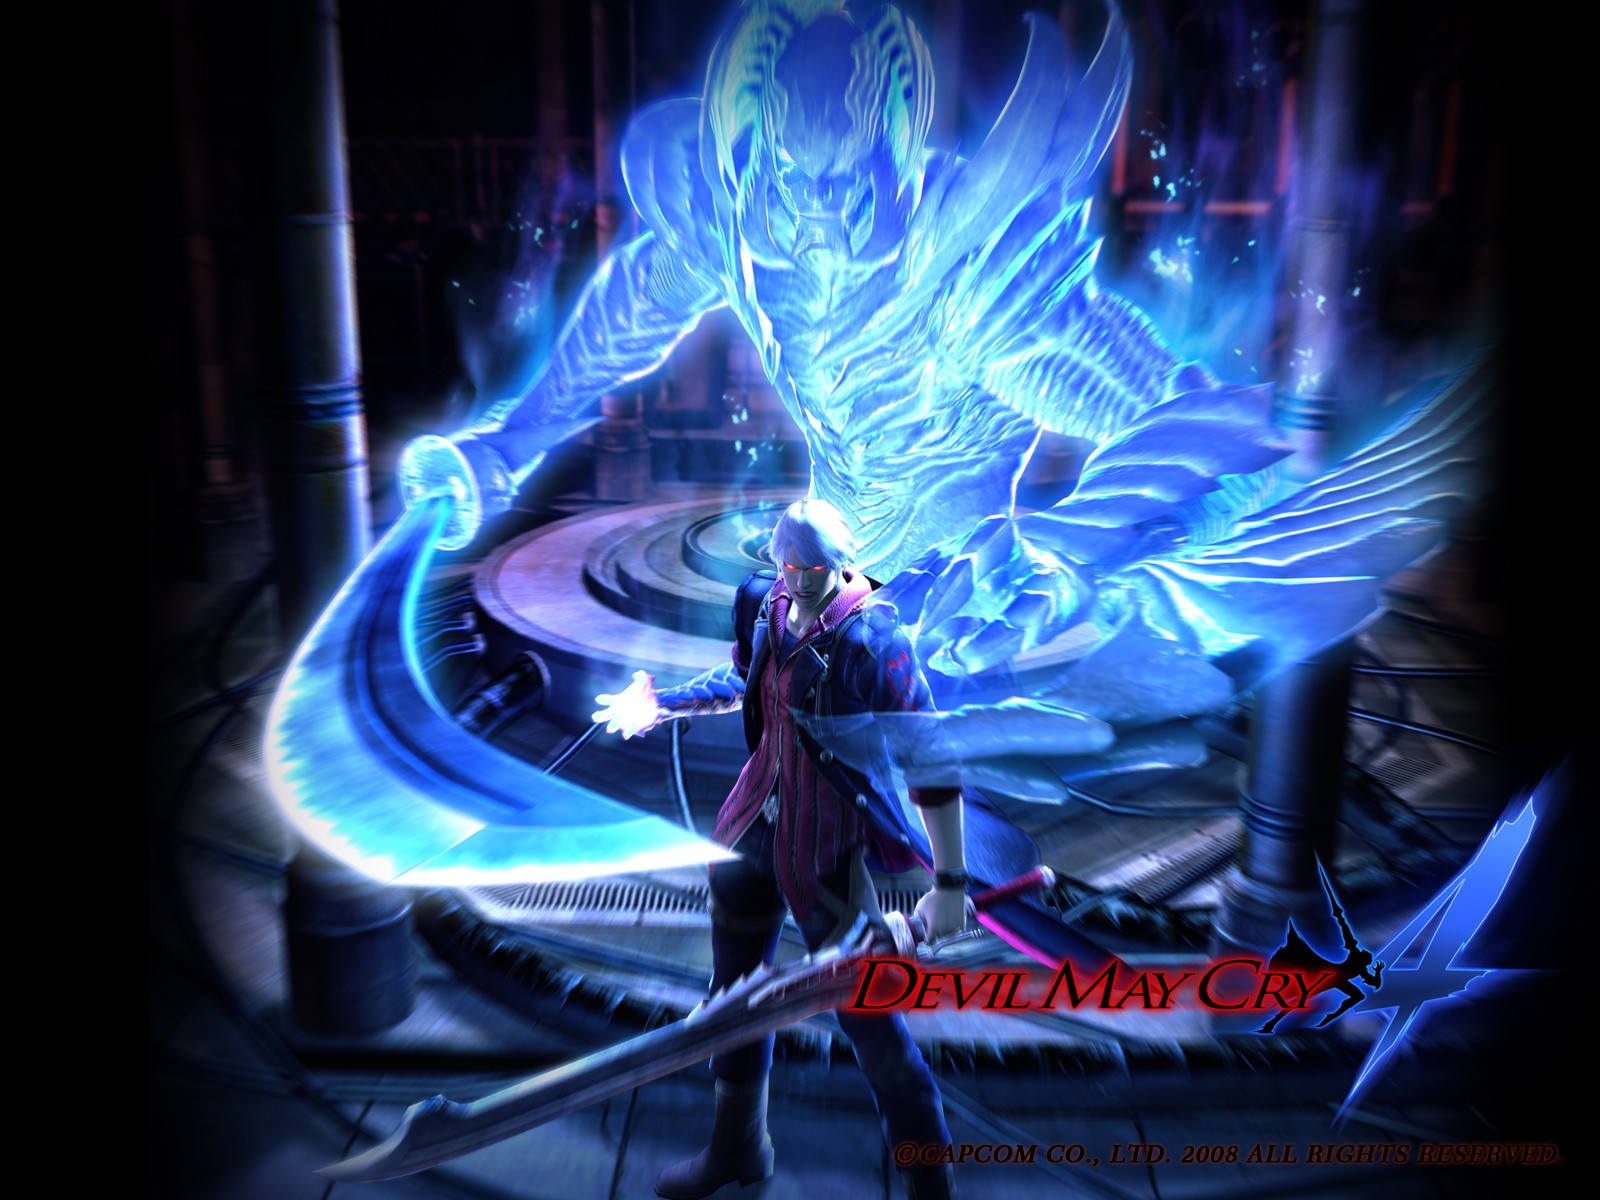 The Devil May Cry4 devil may cry 4 wallpaper wp20080208 1 1600x1200